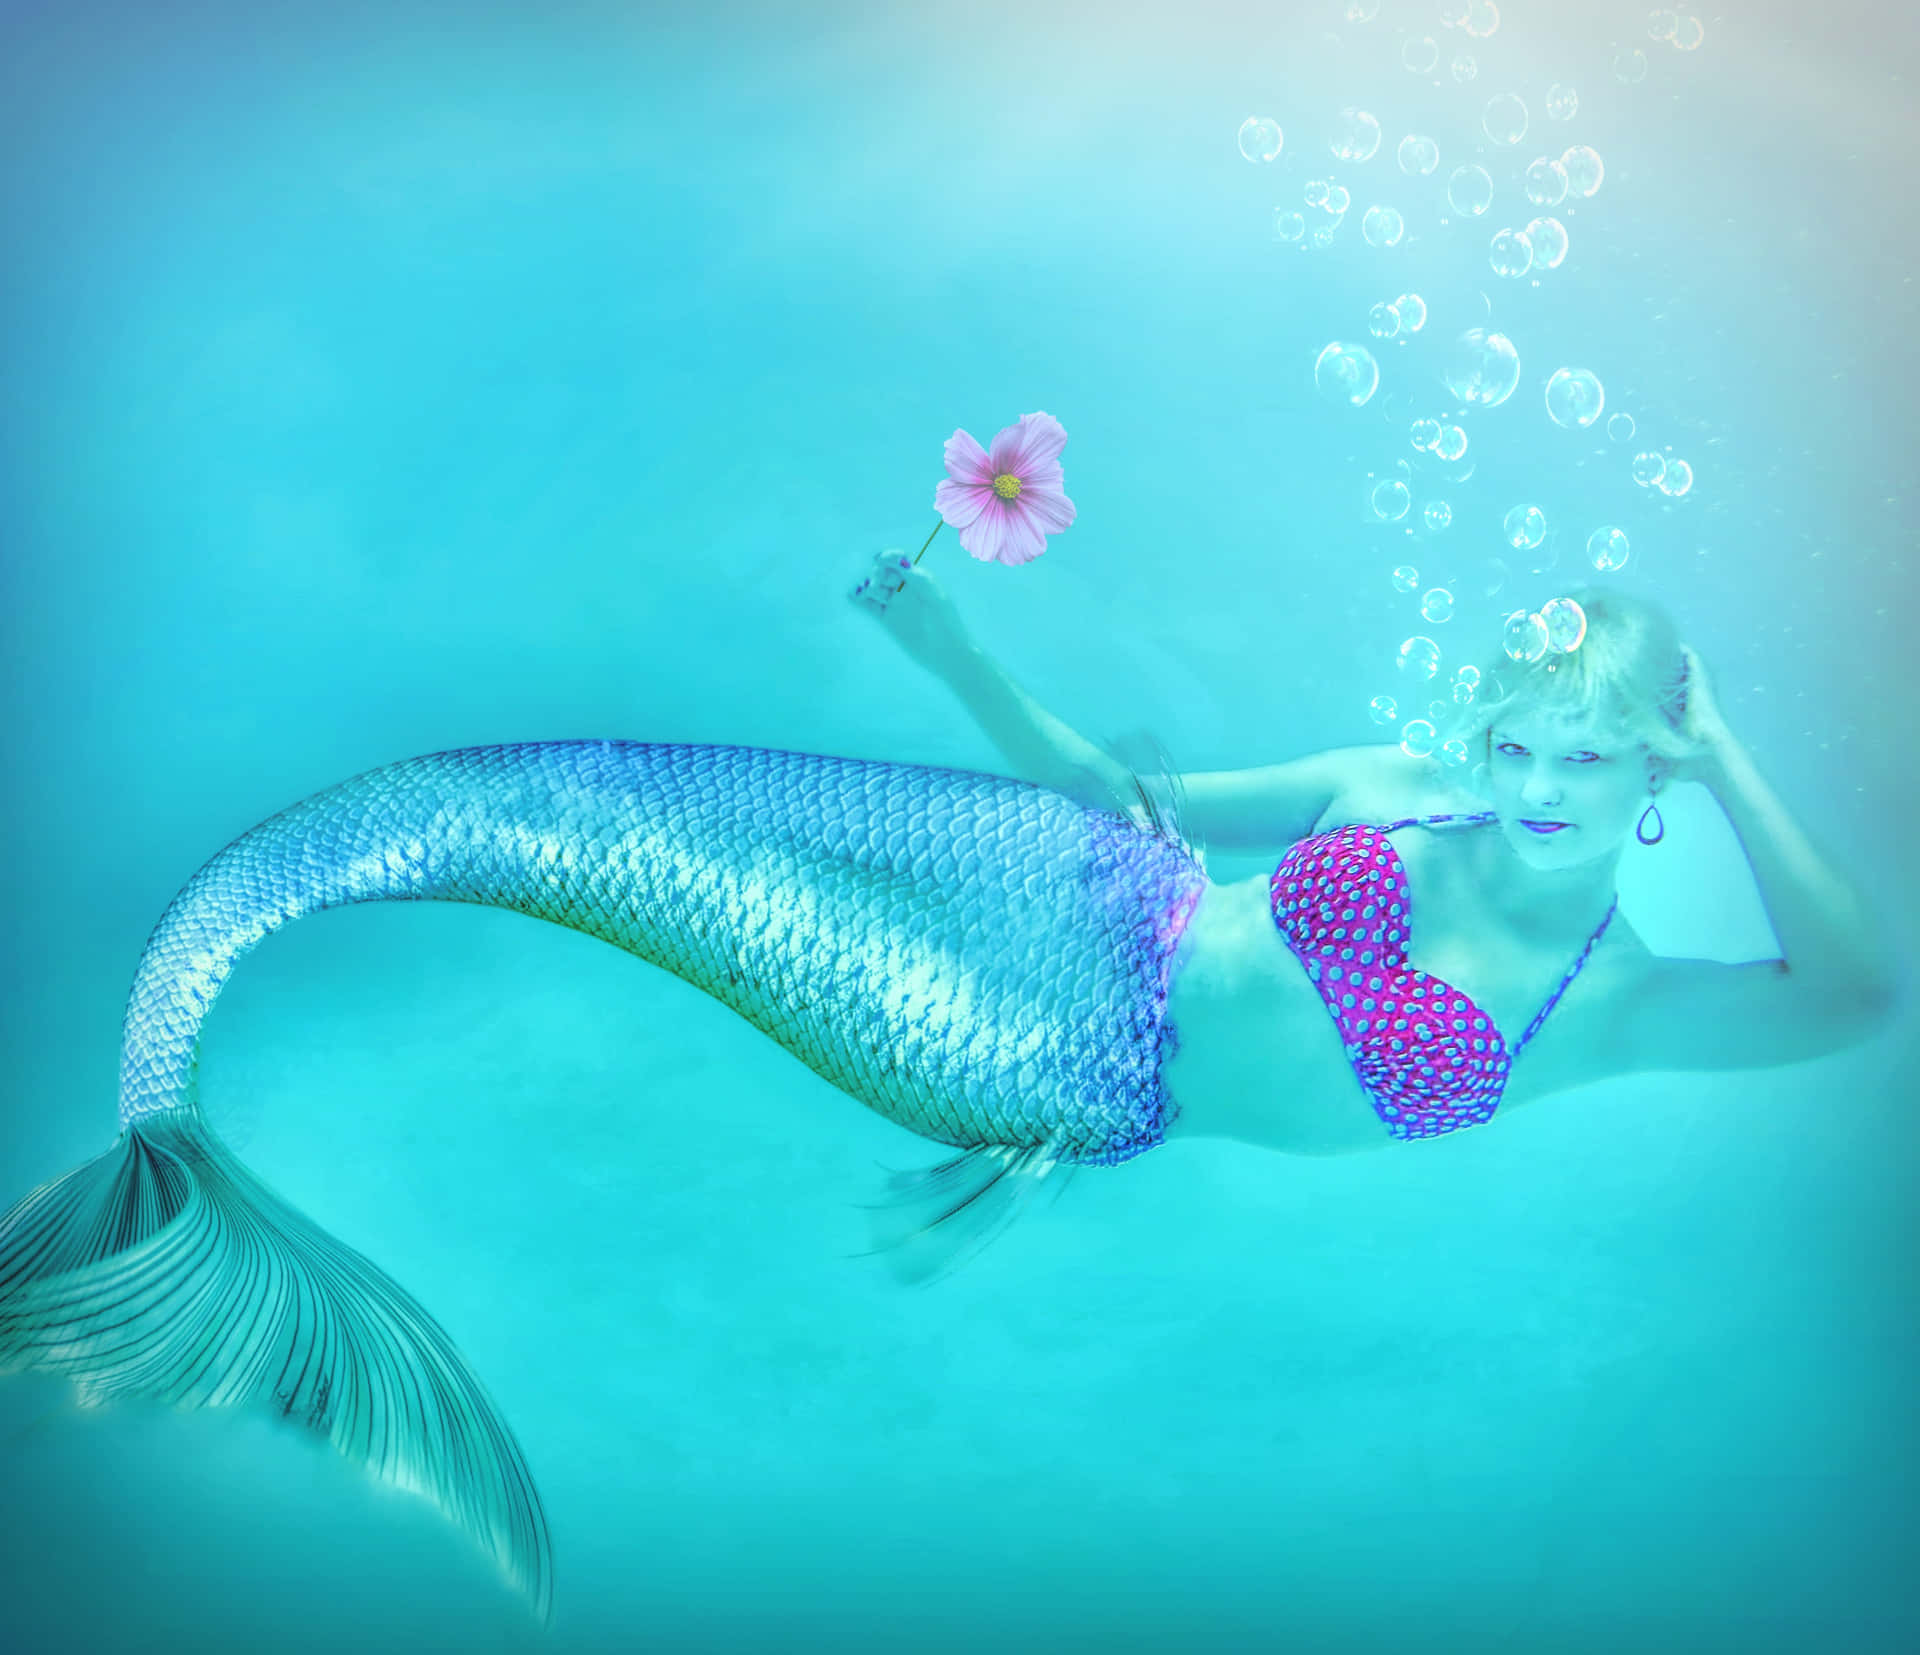 Mystical Underwater Beauty - a Vibrantly Colored Mermaid Illustration